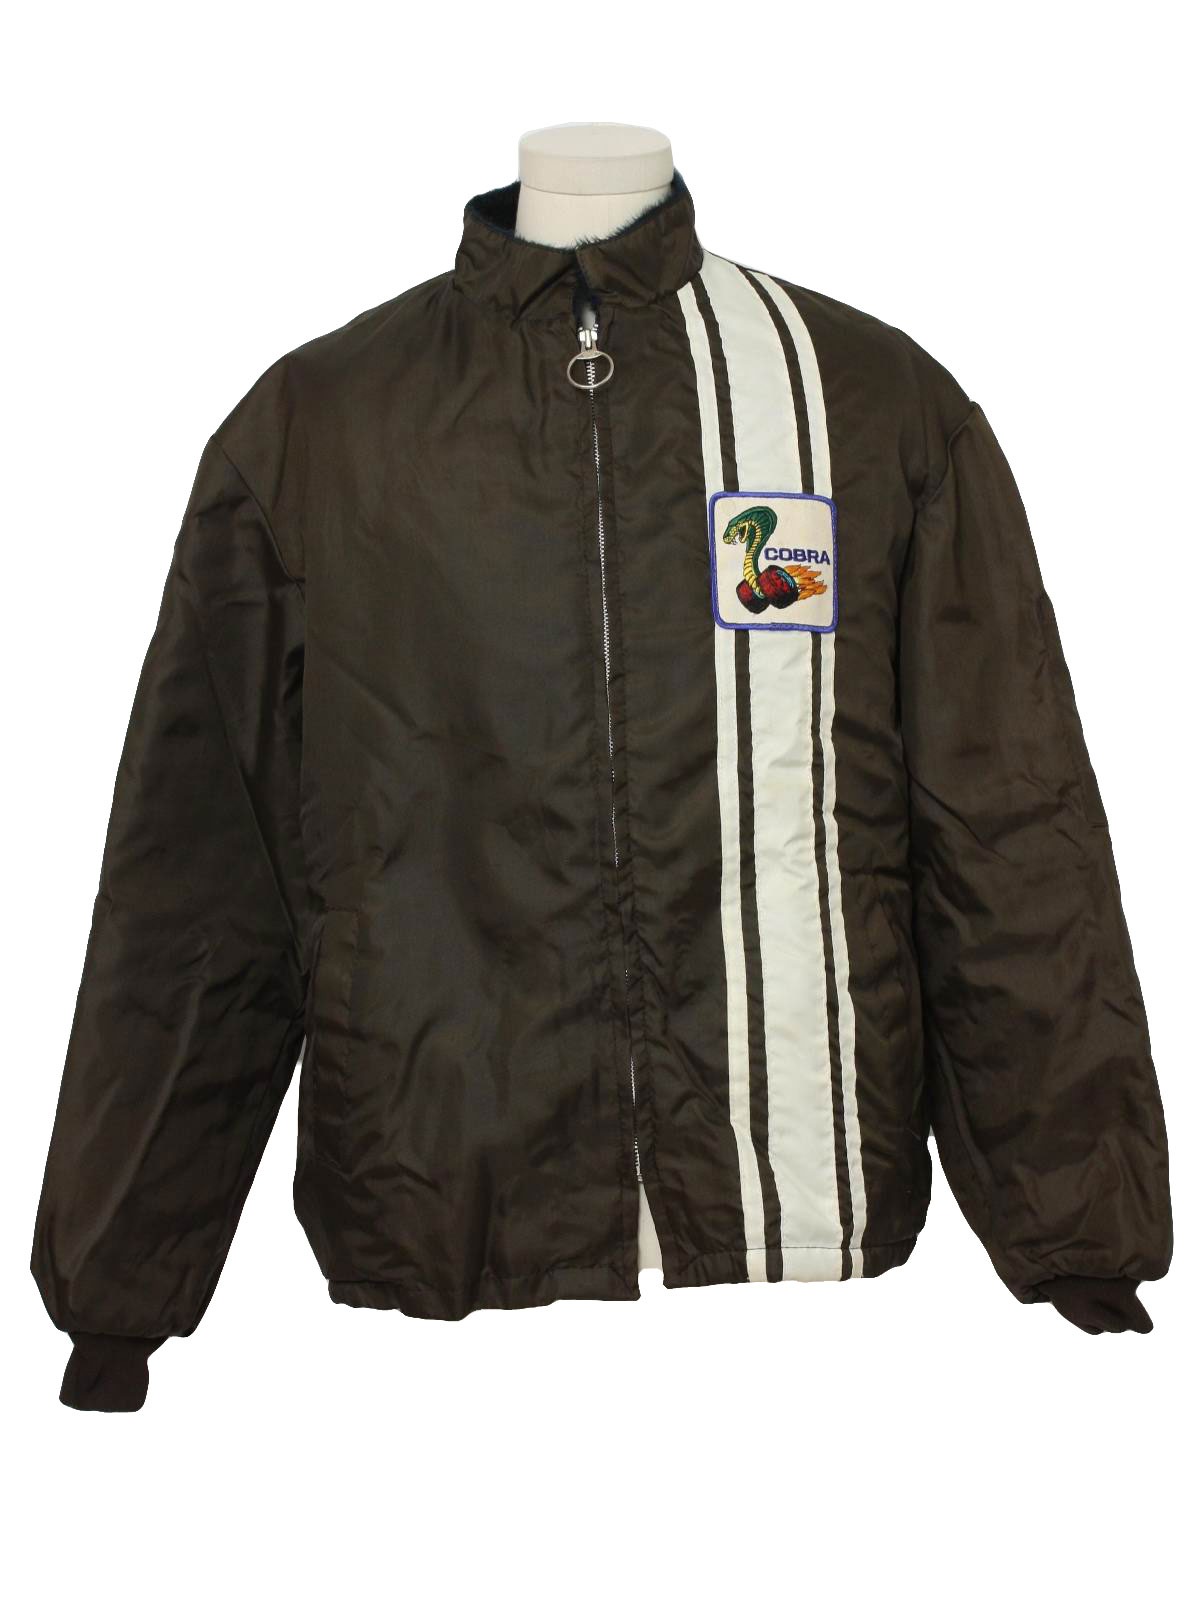 Ford racing jacket with cobra logo on it